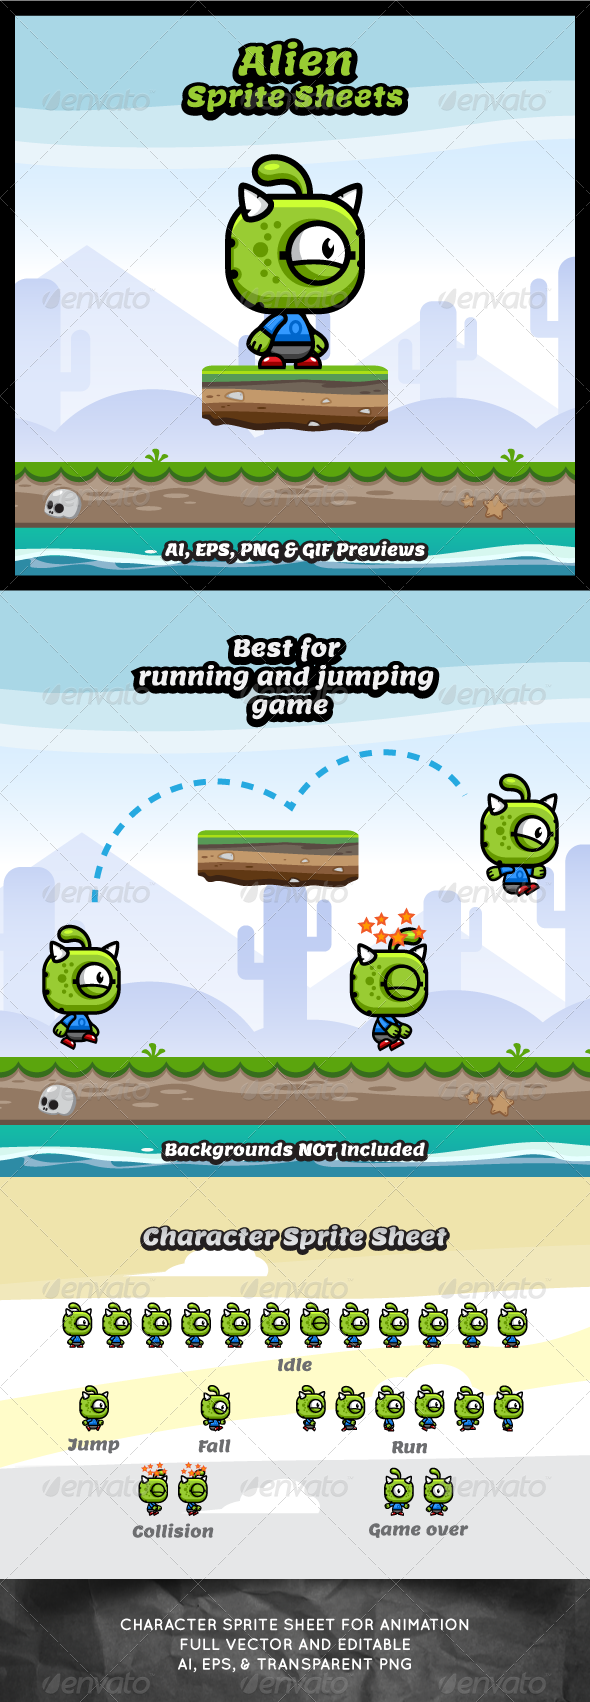 Running and jumping alien game character sprite sheet sidescroller game asset animation gui mobile games gameart game art 590